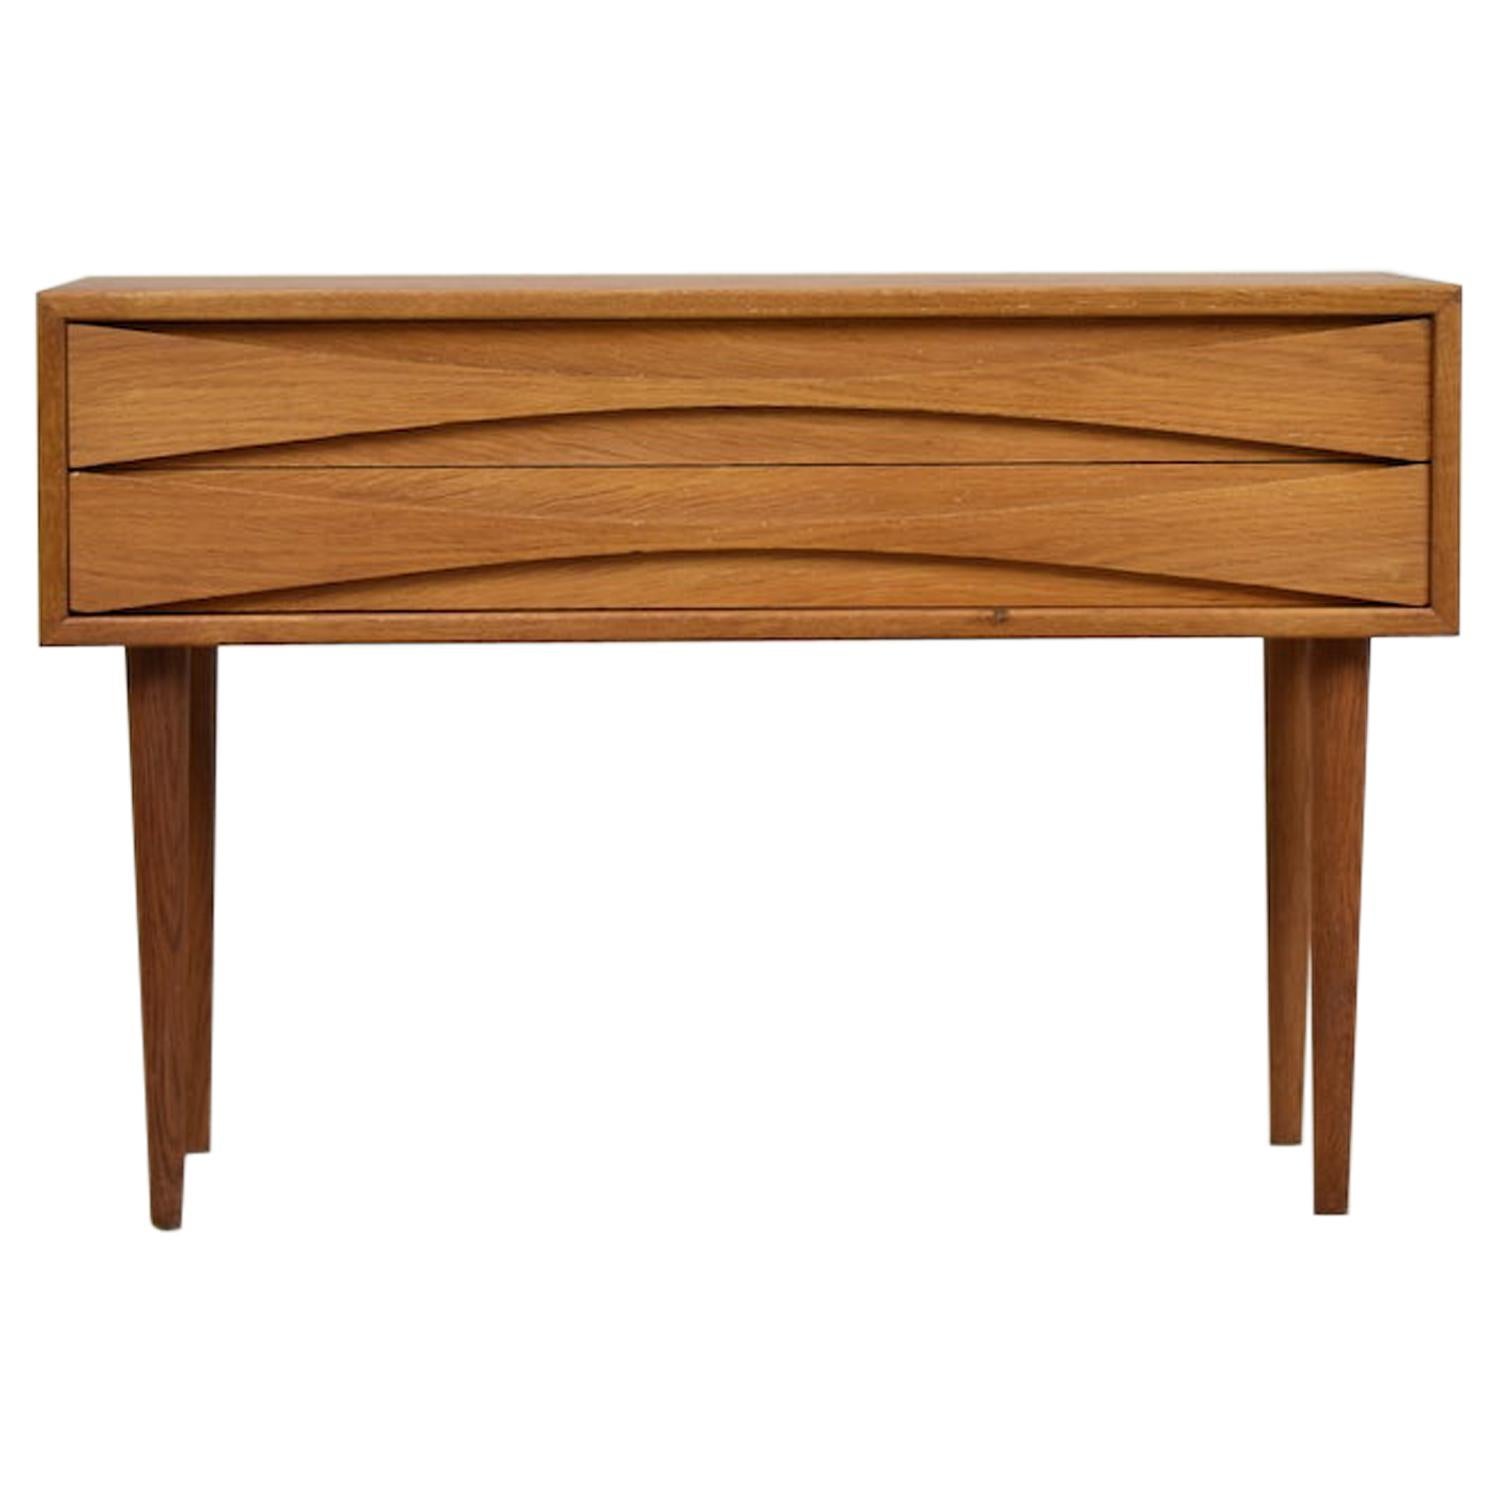 Oak Chest of Drawers by Niels Clausen for NC Möbler, Denmark, 1960s